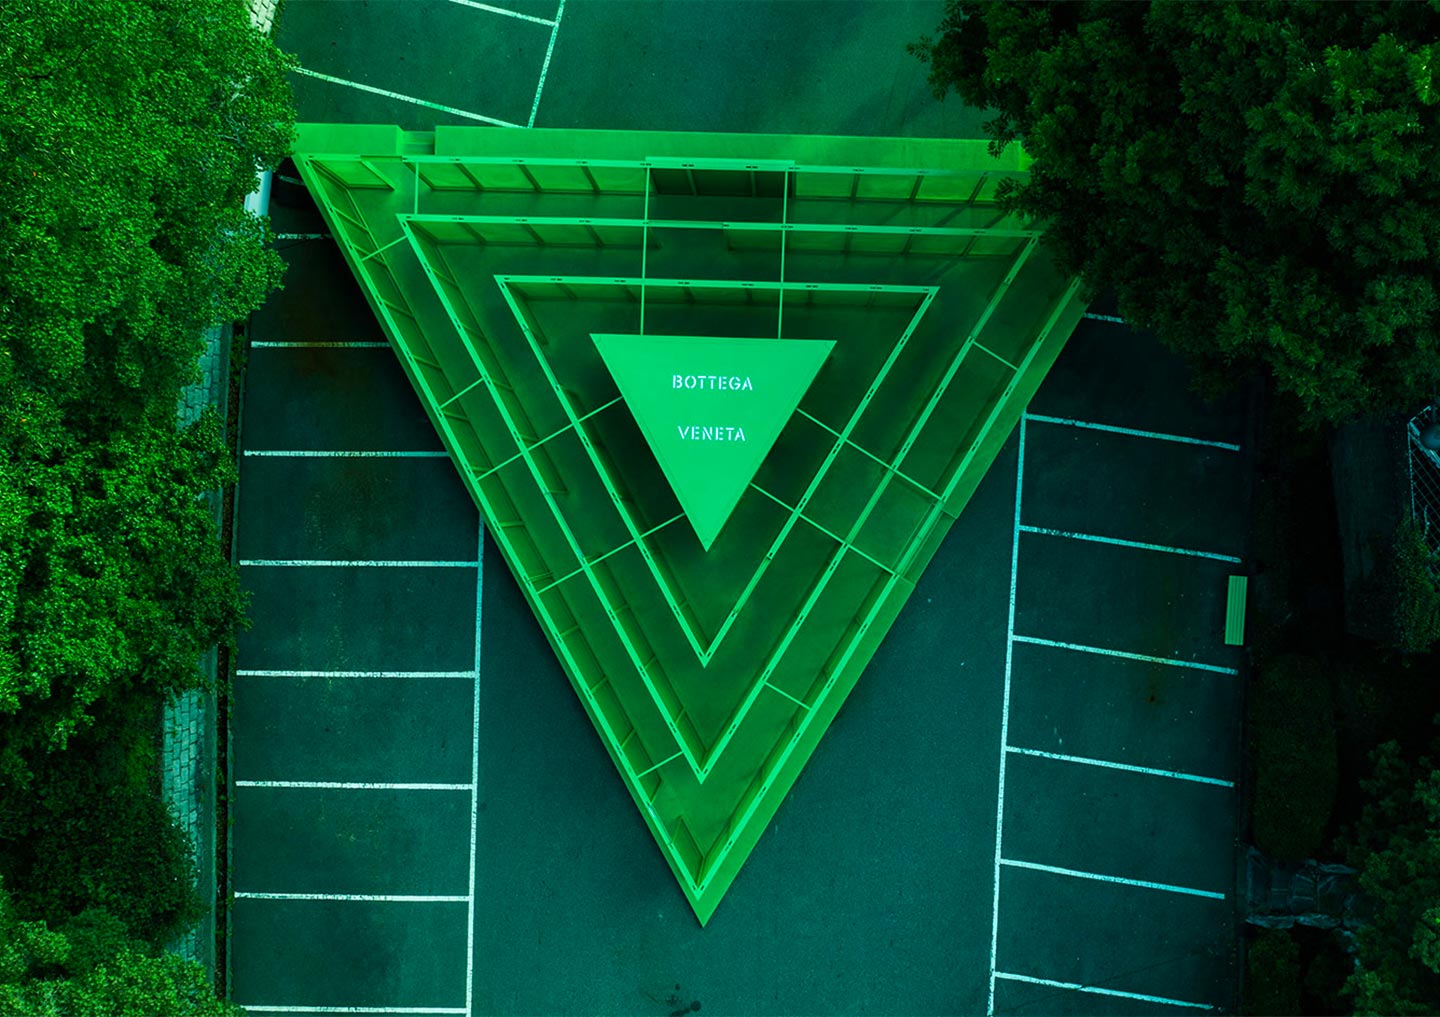 In October 2021, a triangular installation by Bottega Veneta, dubbed 'The Maze,' appeared in a car park in Seoul